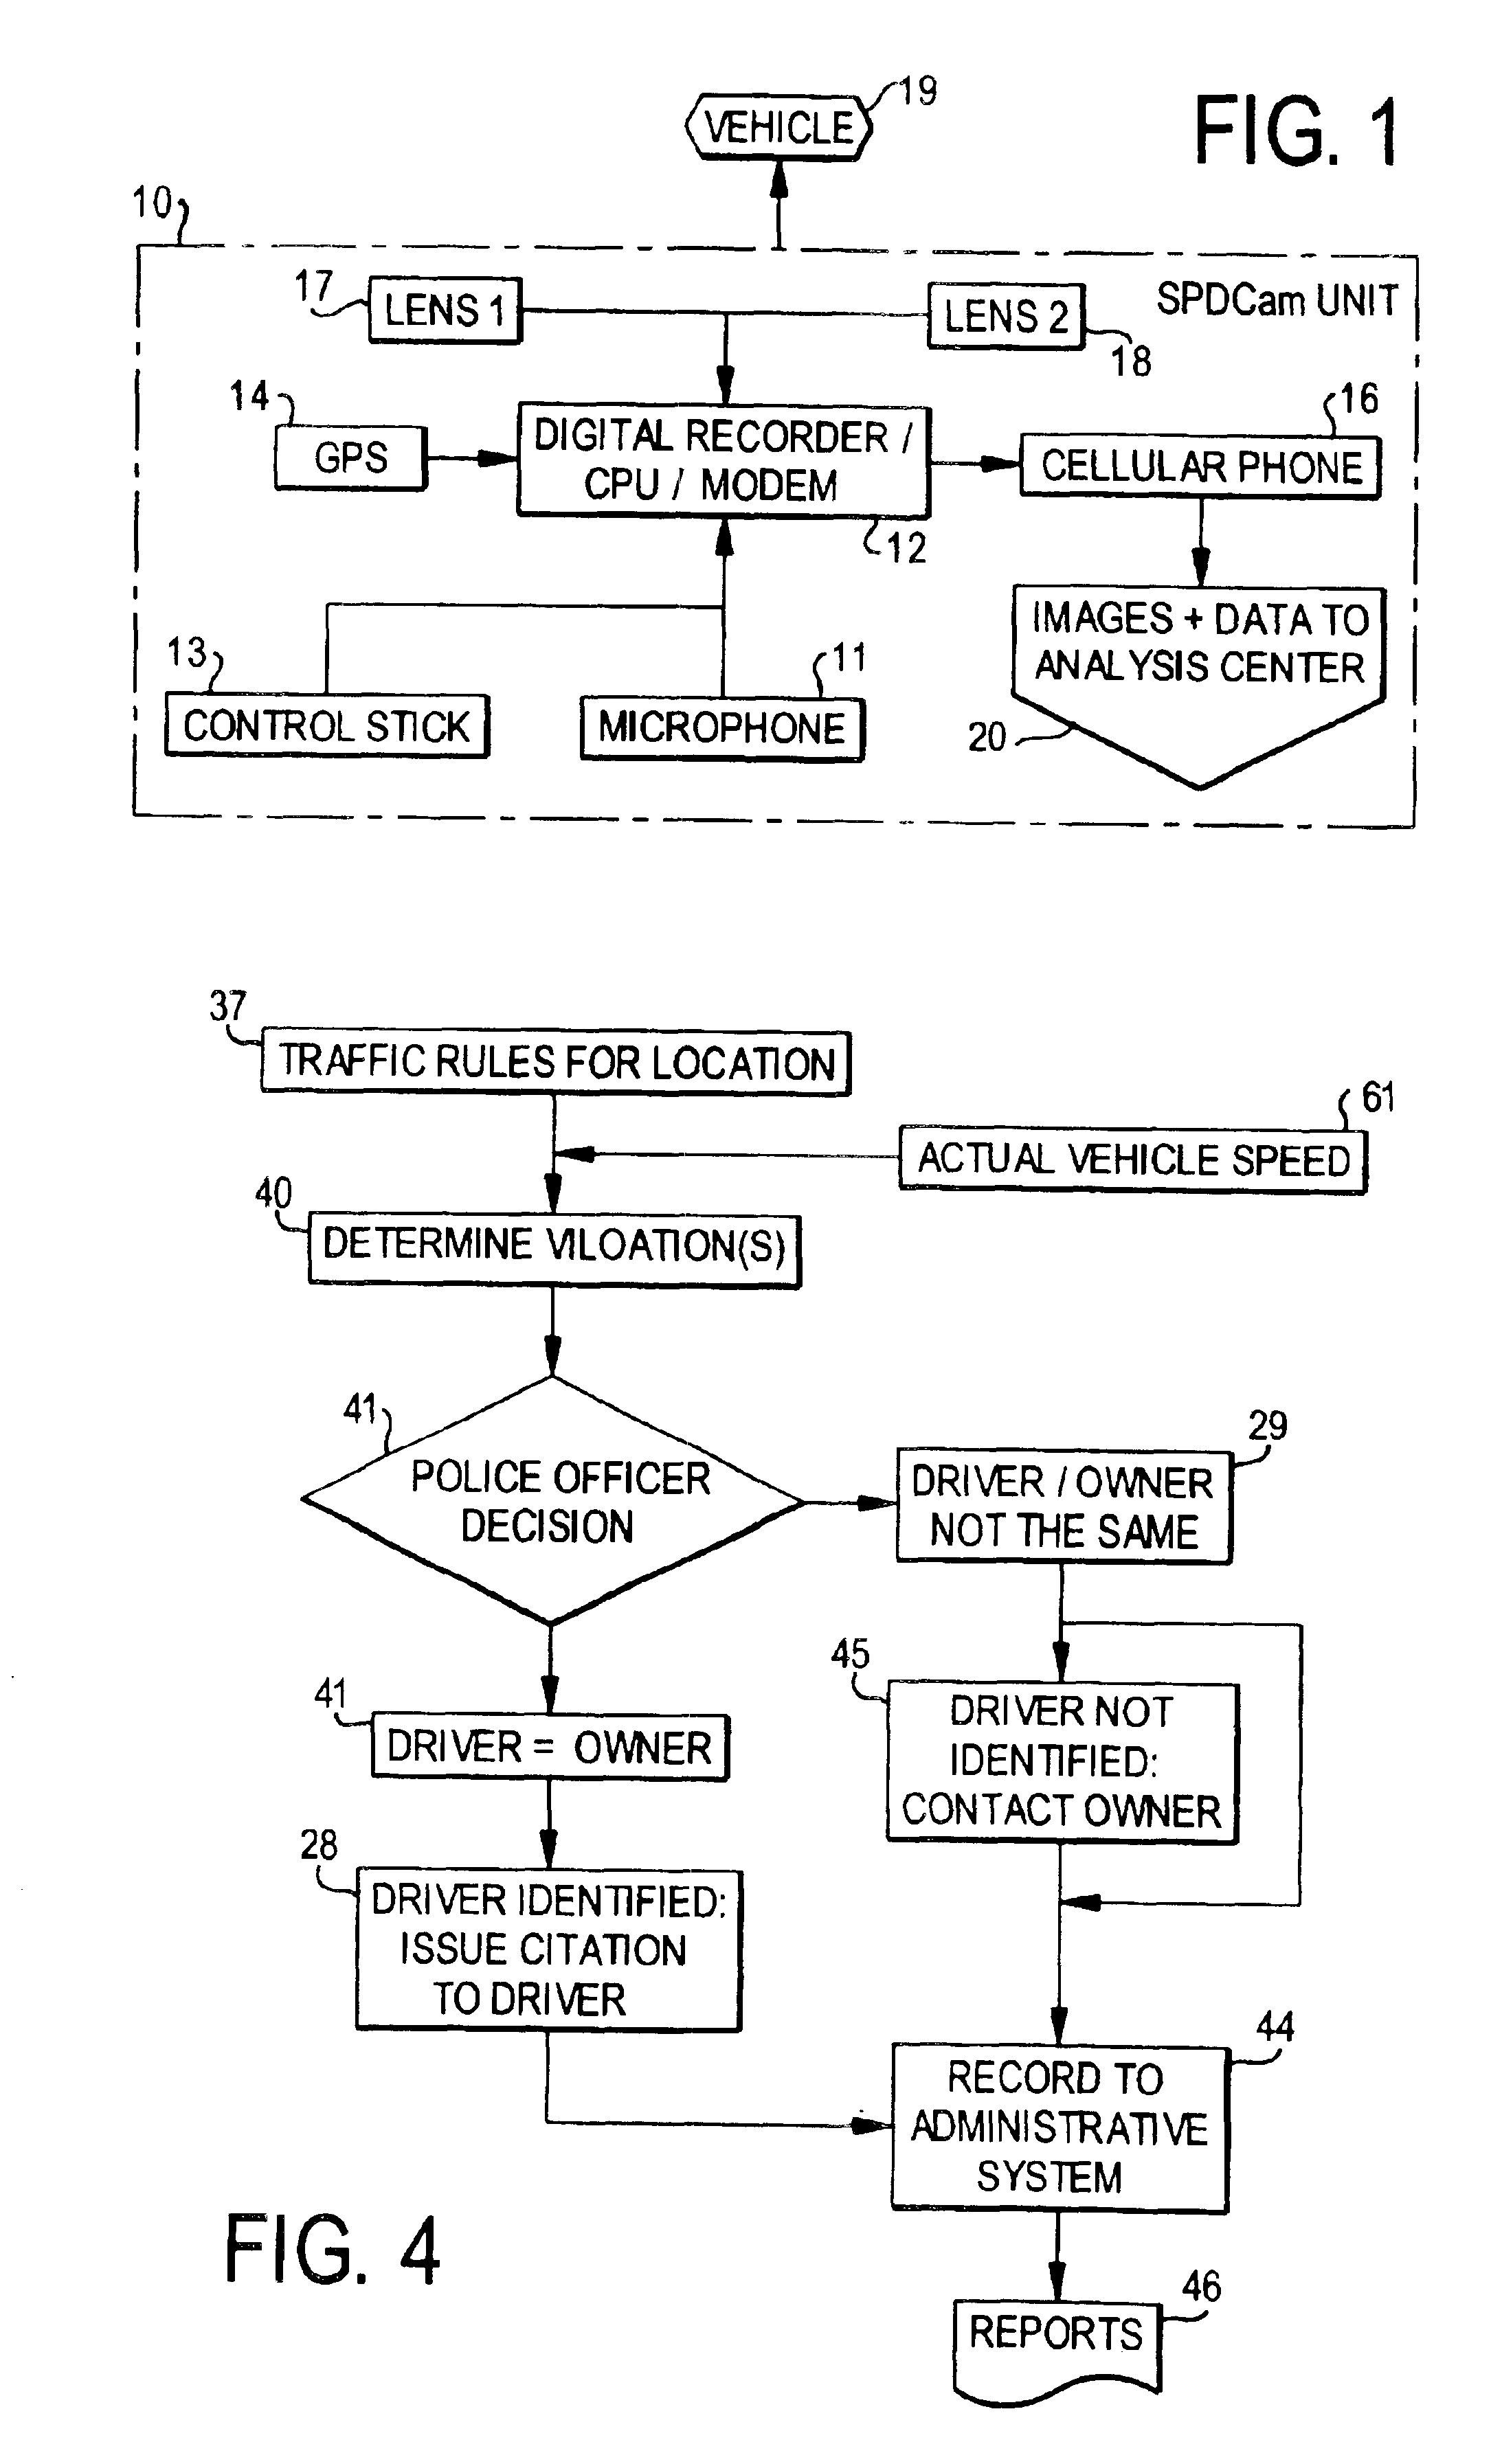 System and method for detecting and identifying traffic law violators and issuing citations